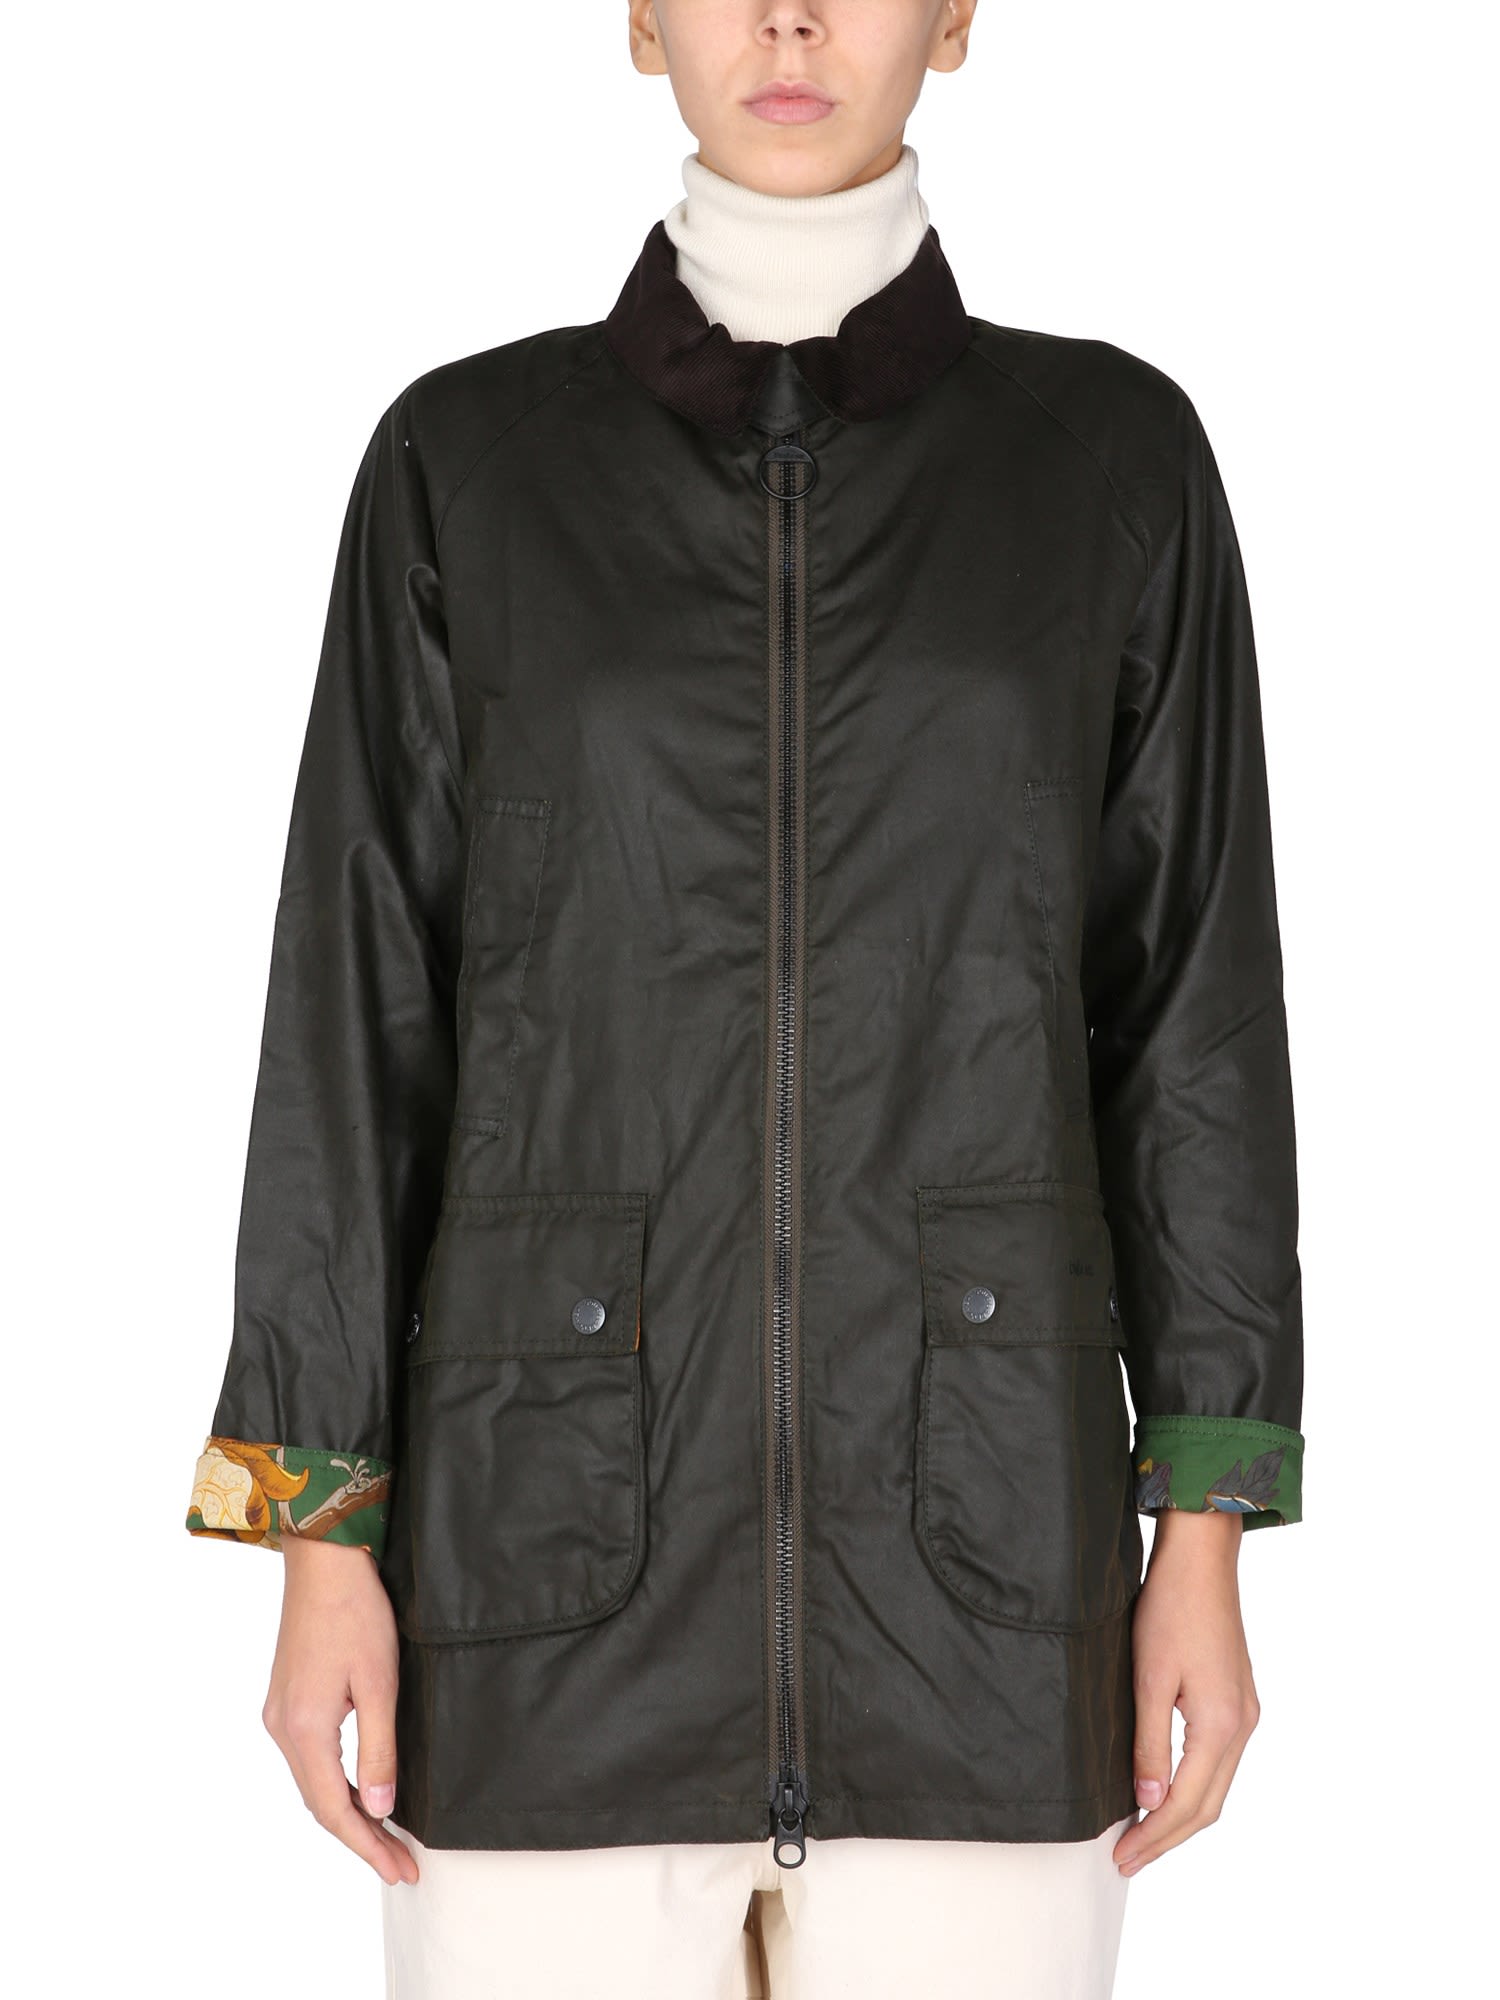 Barbour Jacket With Contrast Lining